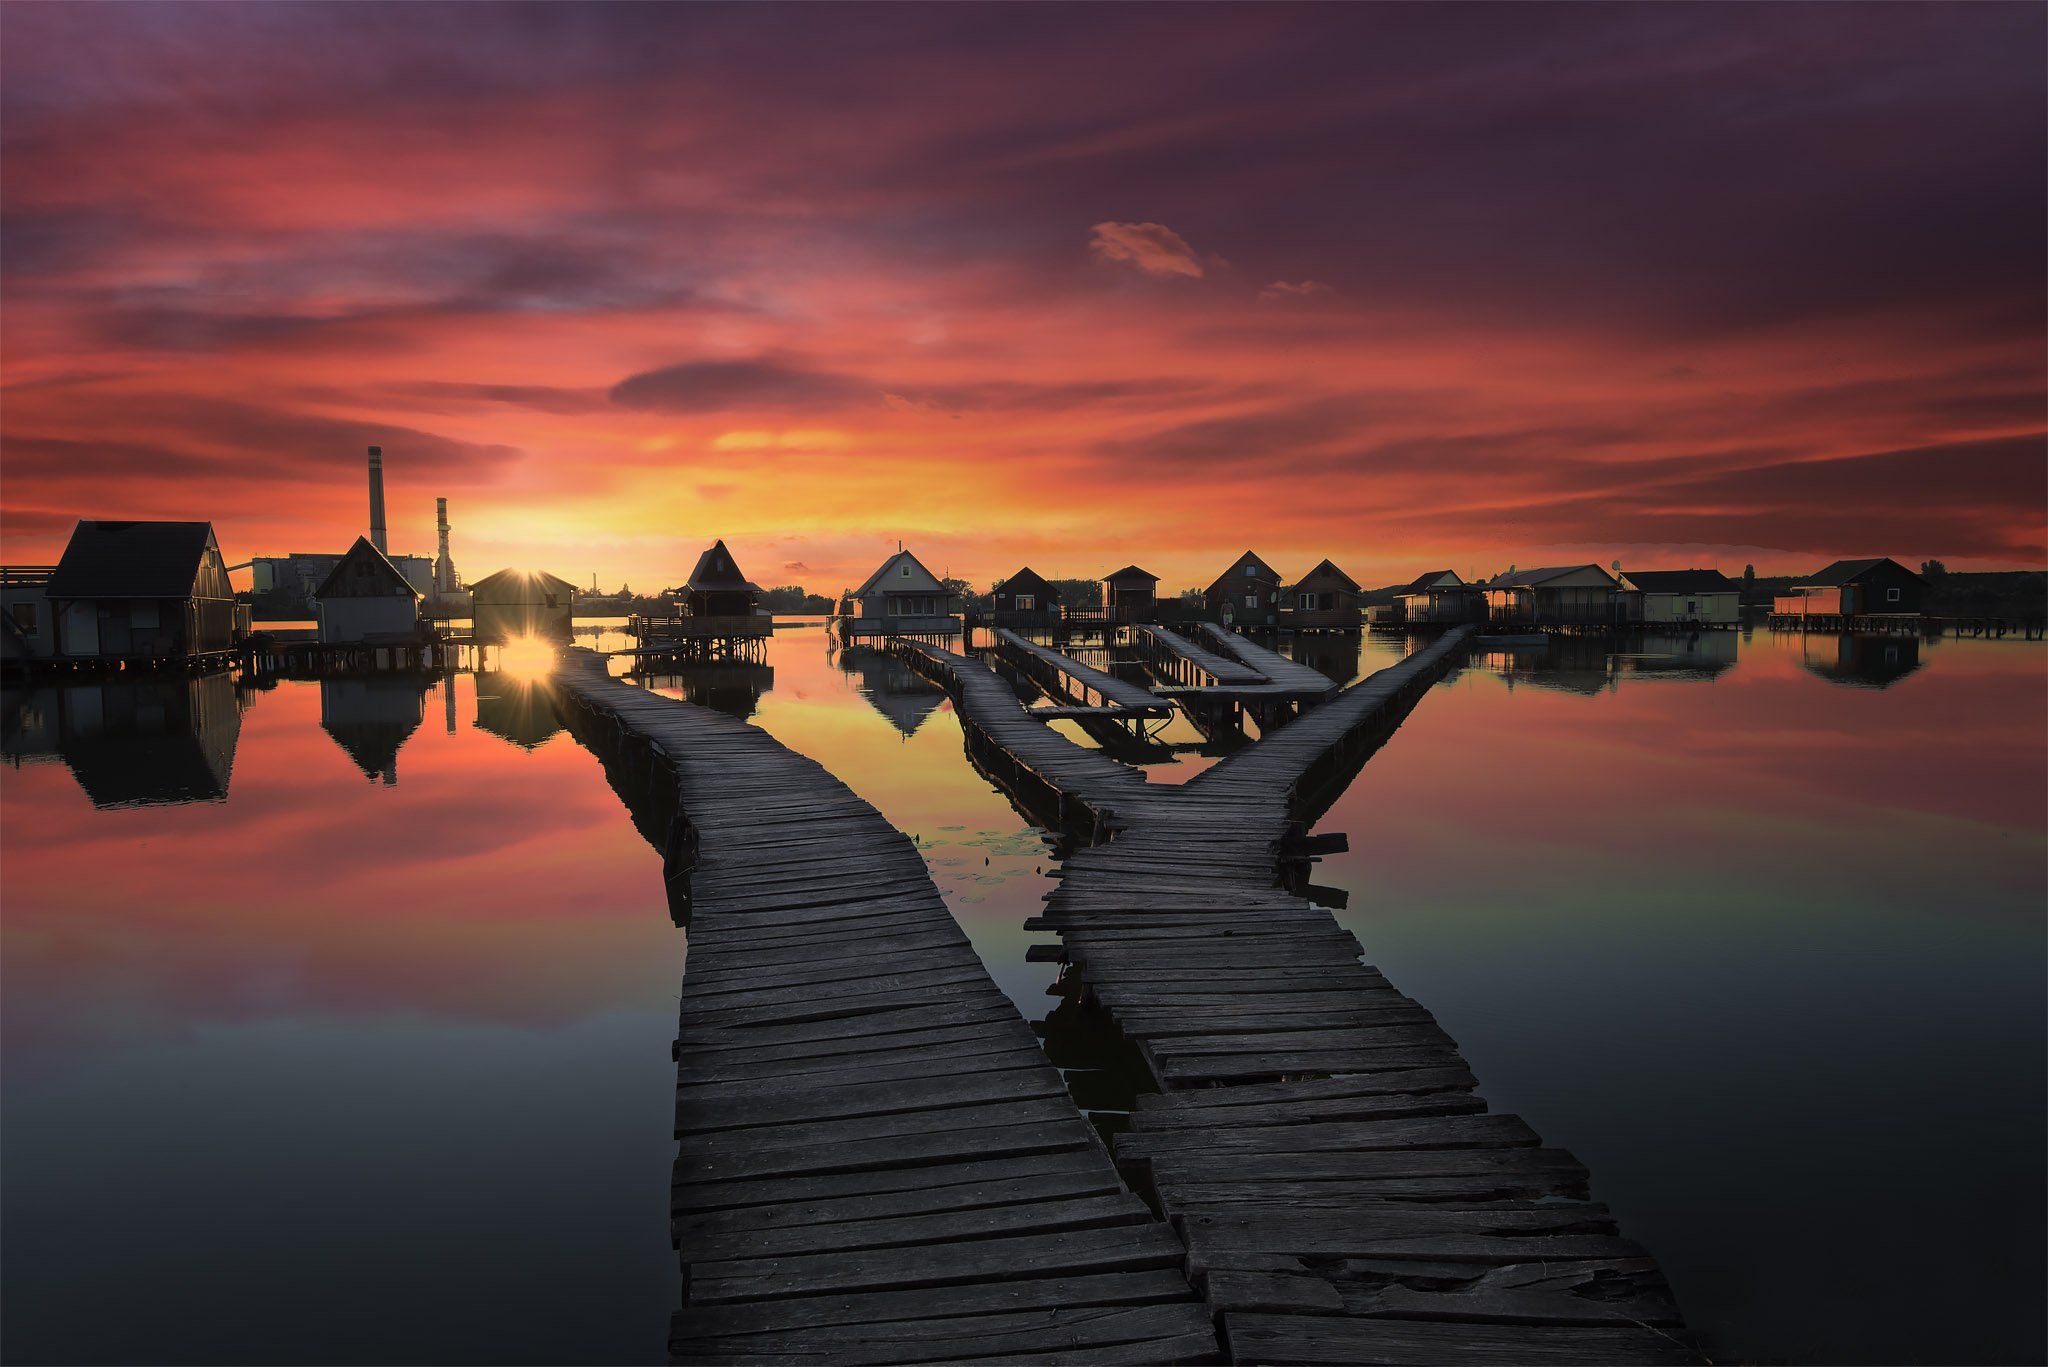 lake, huts in water, sunset, water, clouds, colors, reflections, Atanas Donev